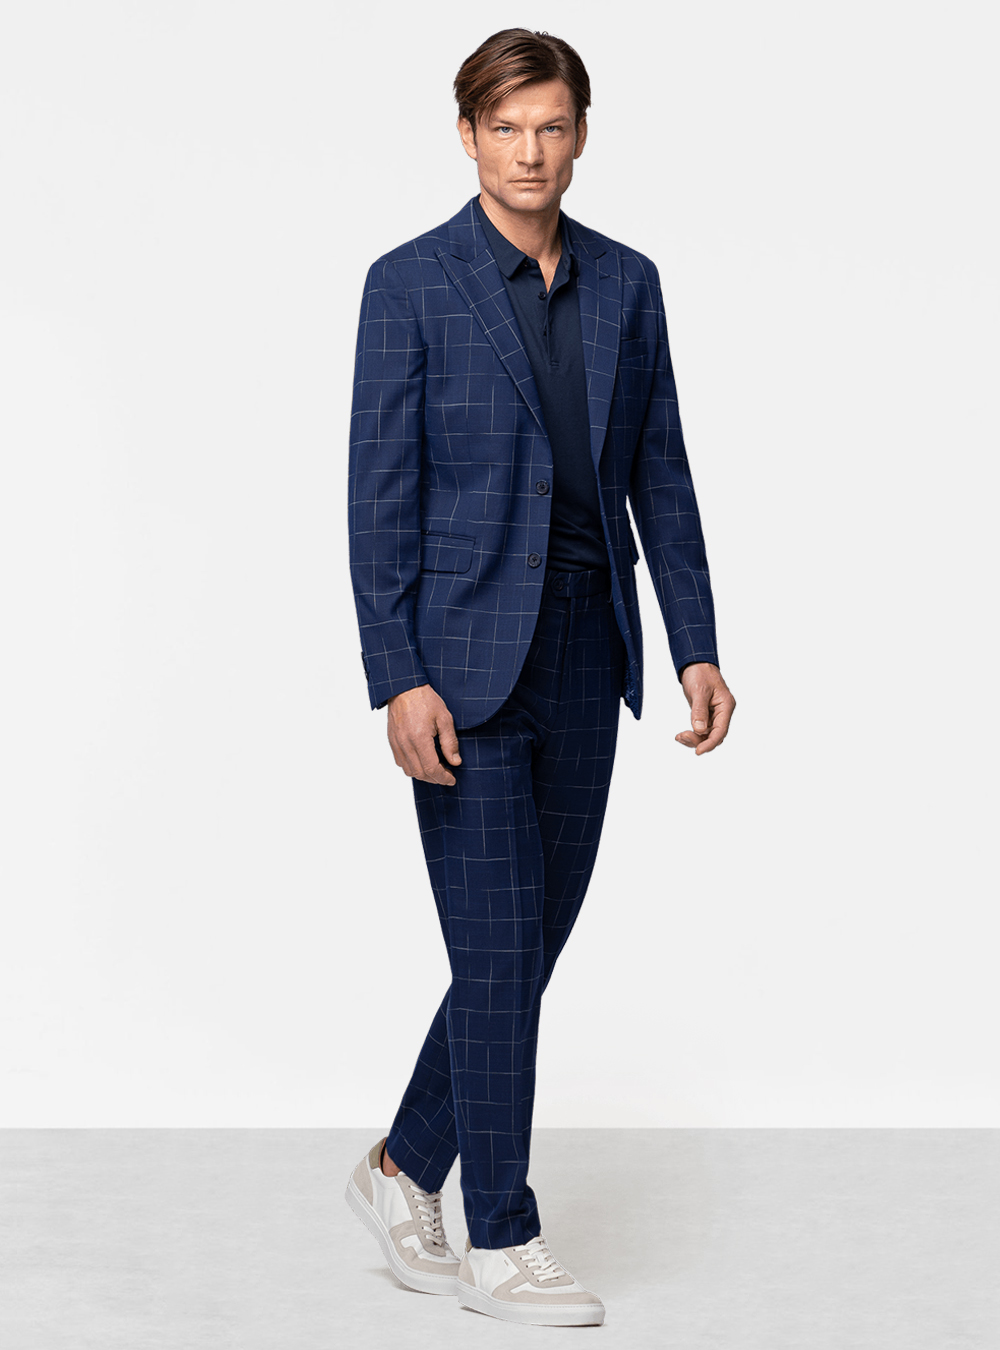 Blue windowpane suit, blue polo t-shirt and white sneakers